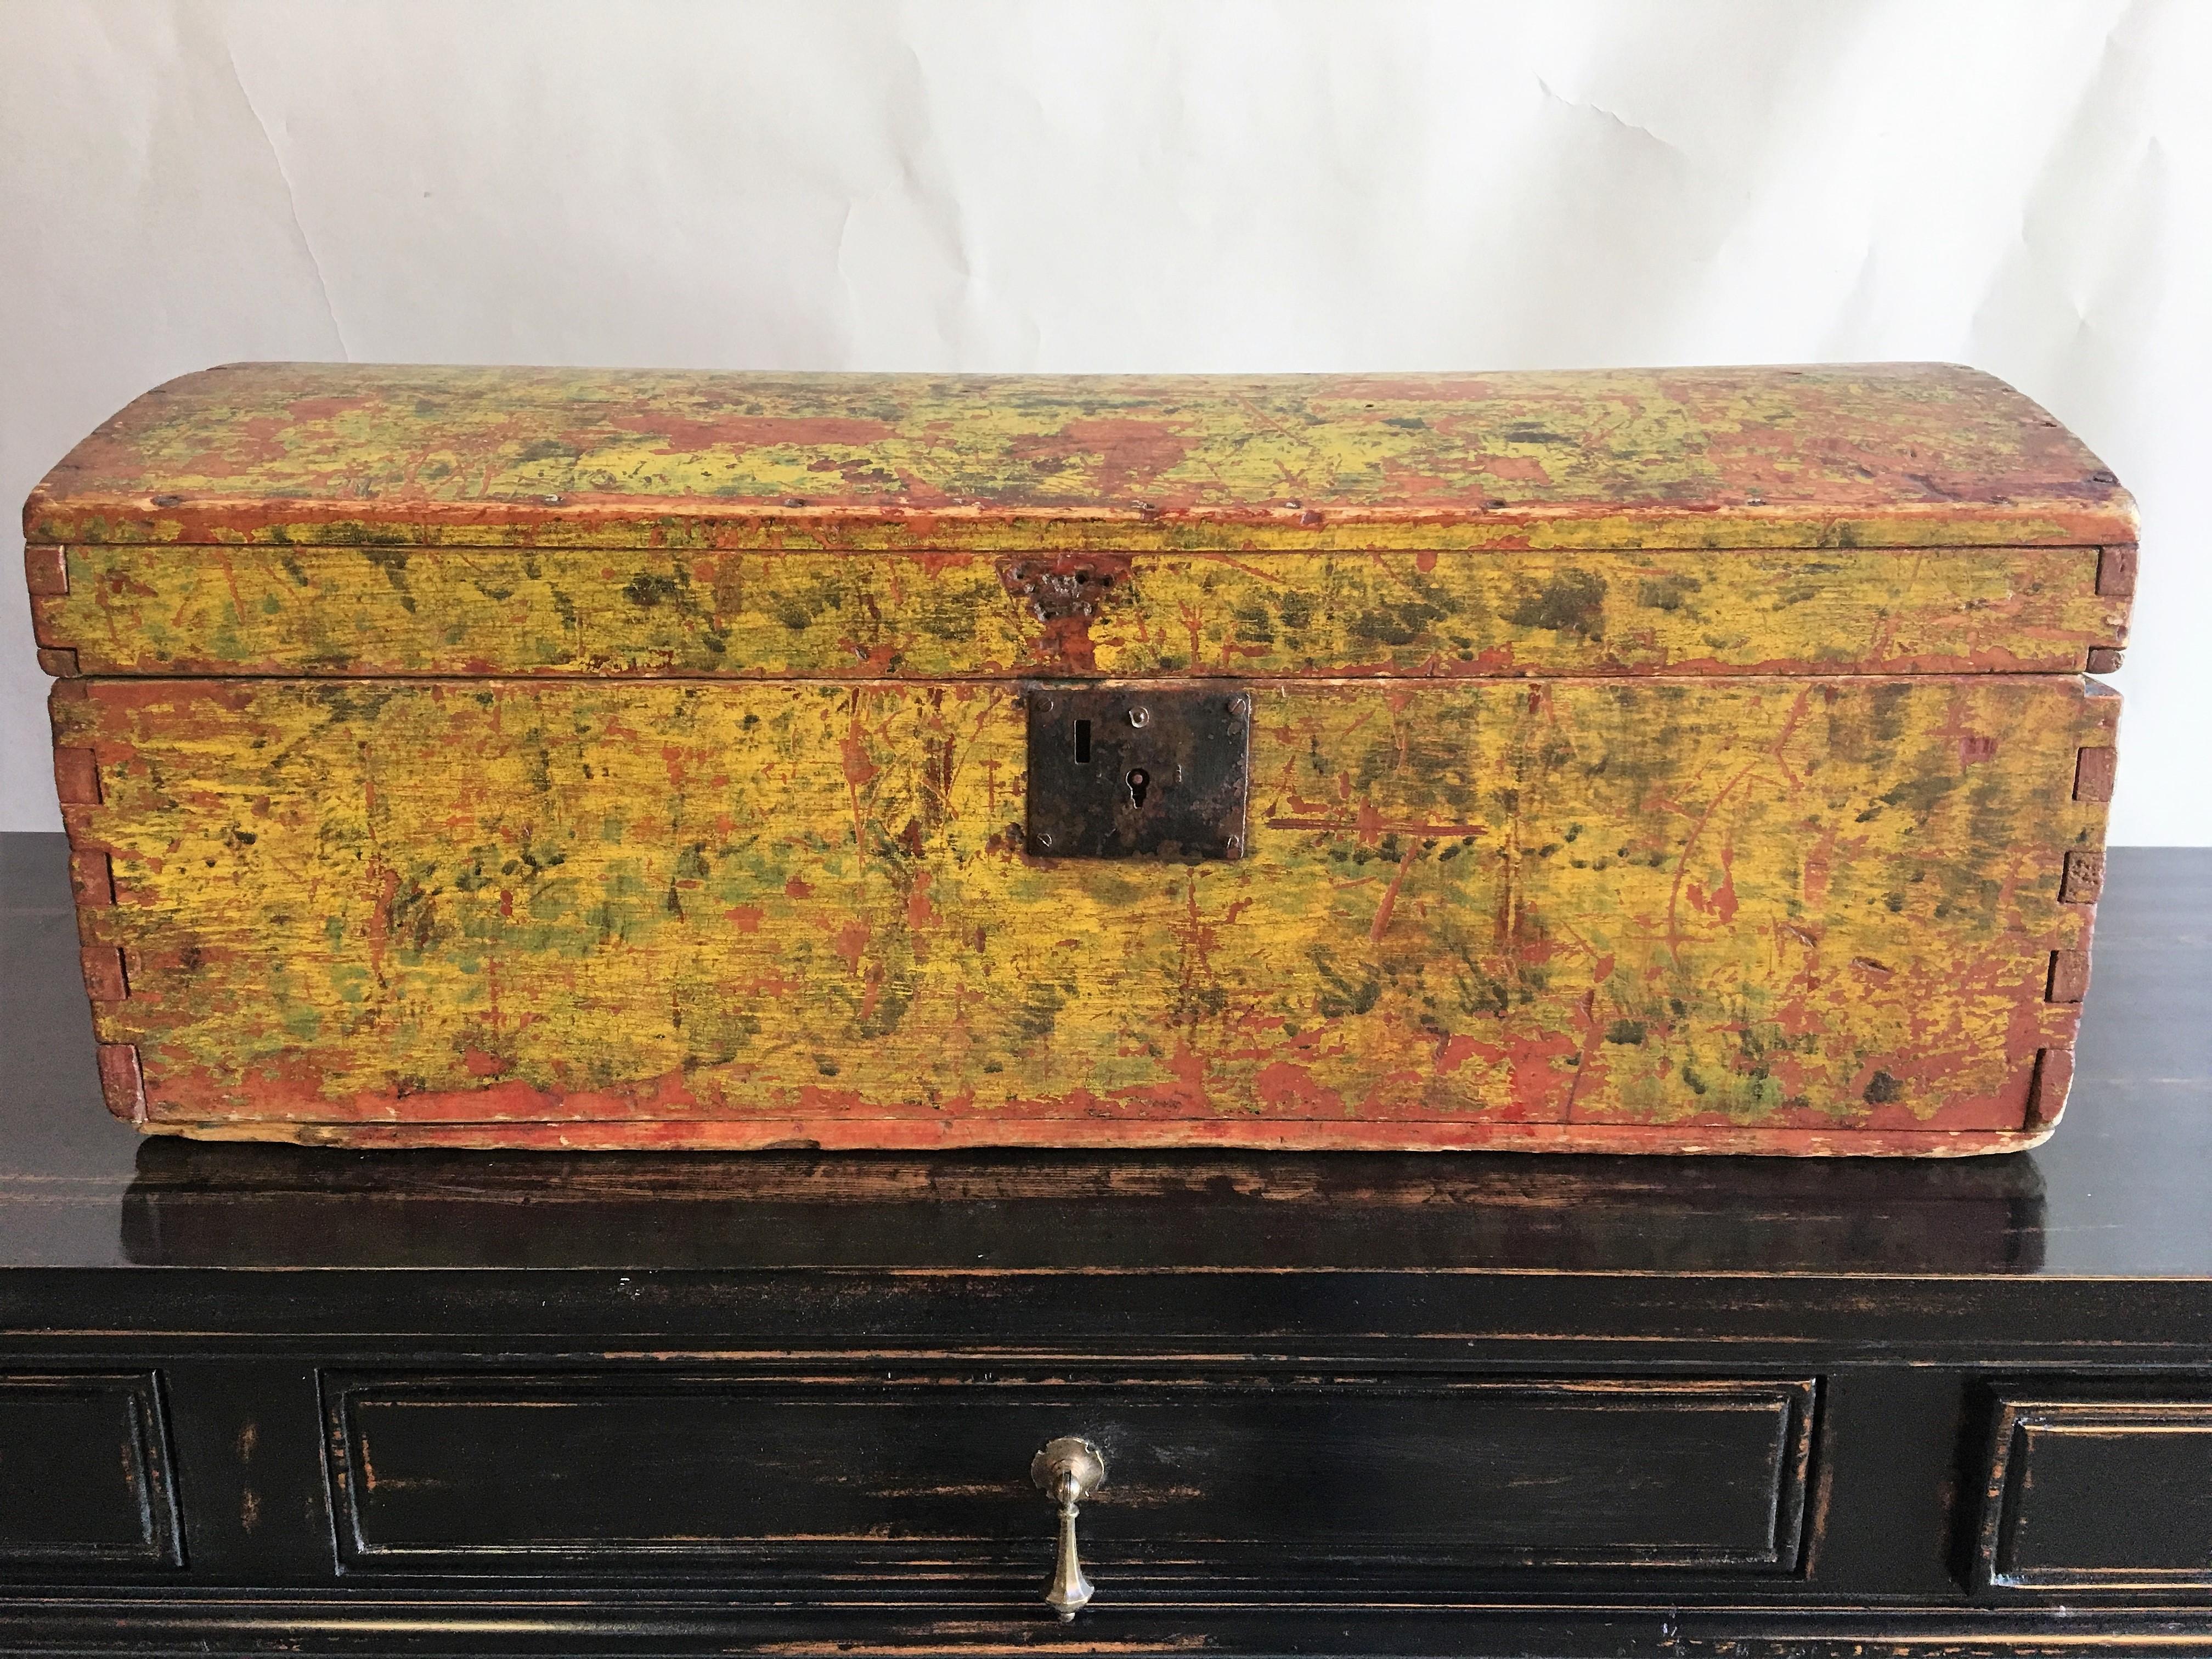 An early American dome-top box in original mustard yellow painted finish, late 18th century.